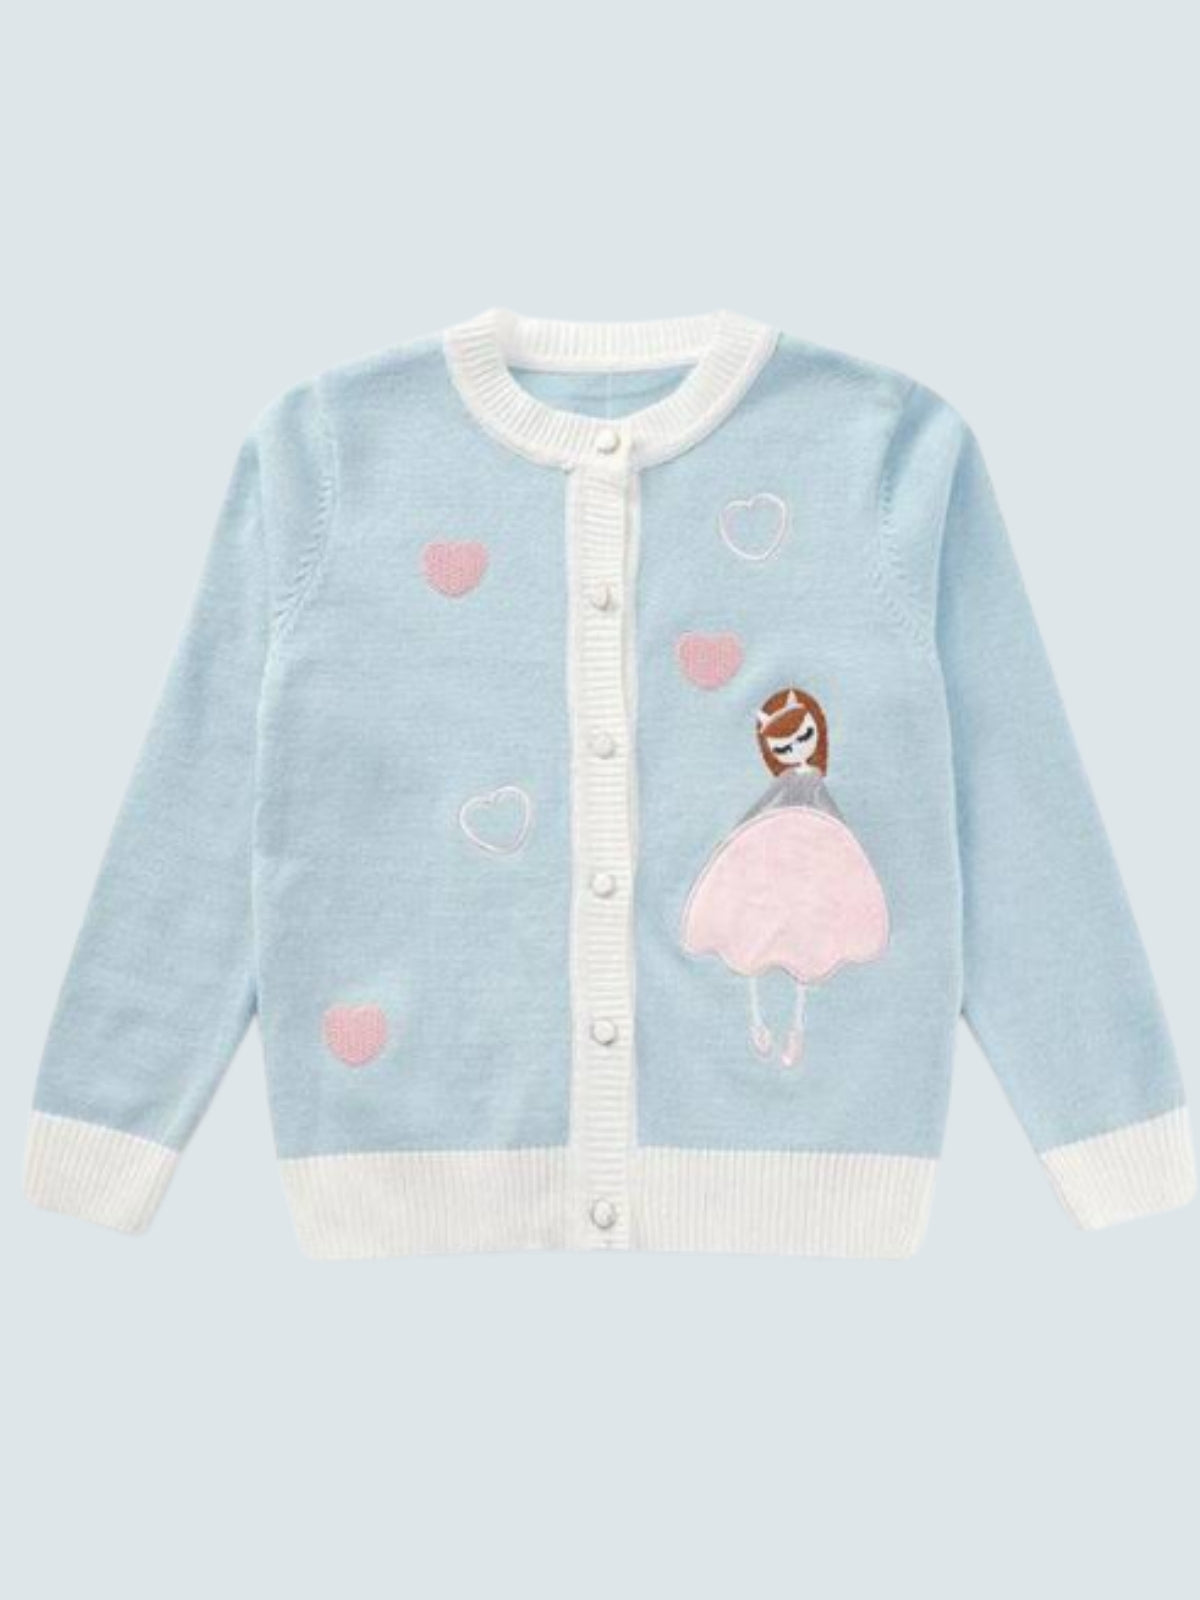 Girls knit sweater with heart and ballerina details